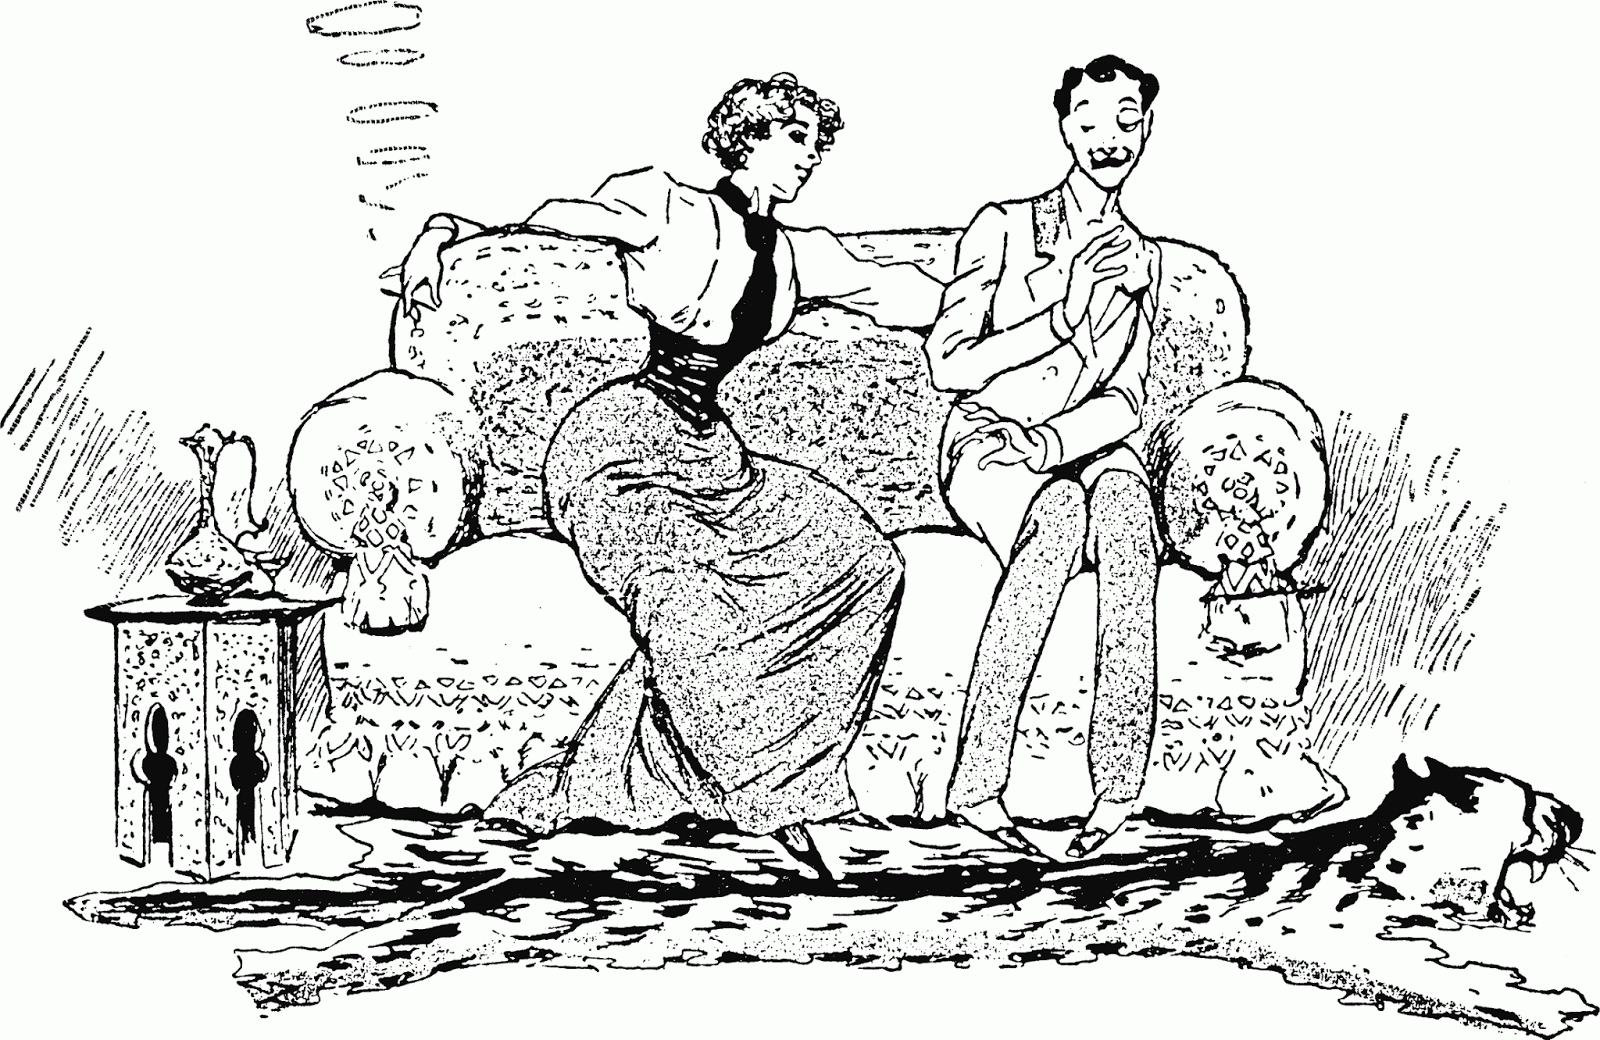 1890s Interracial Porn - Writers in London in the 1890s